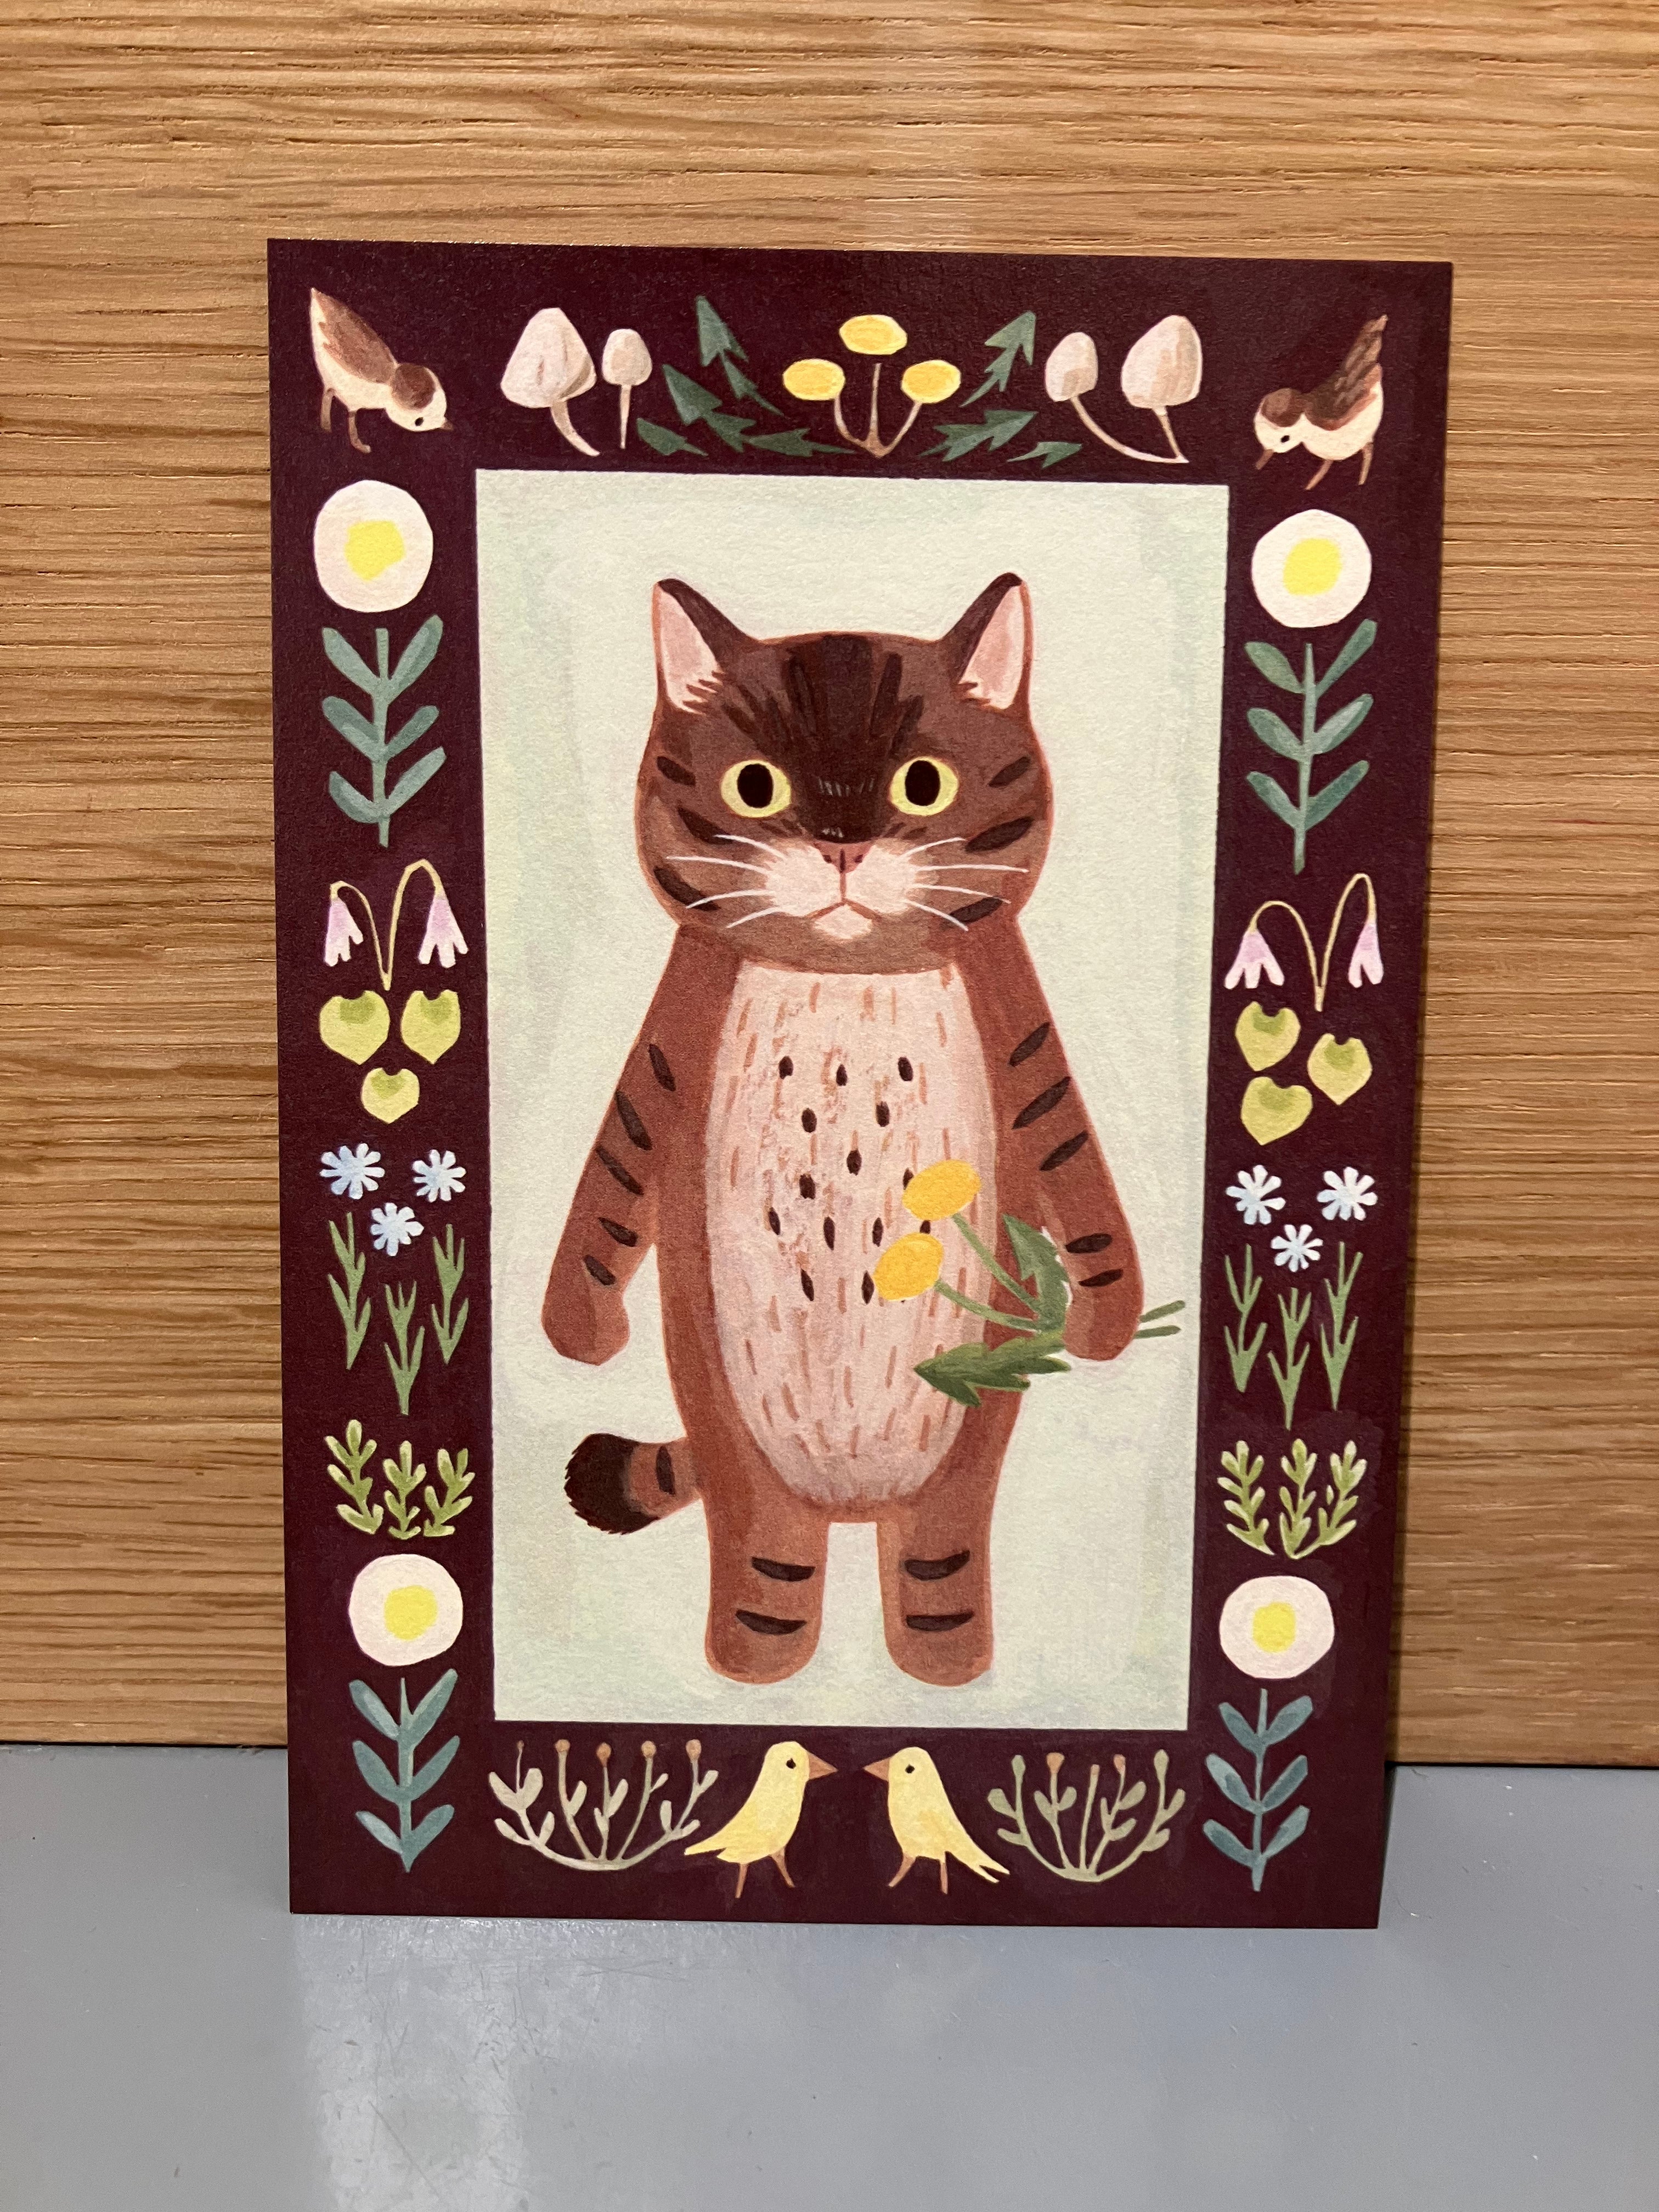 Japanese card with a cat holding a pair of dandelions